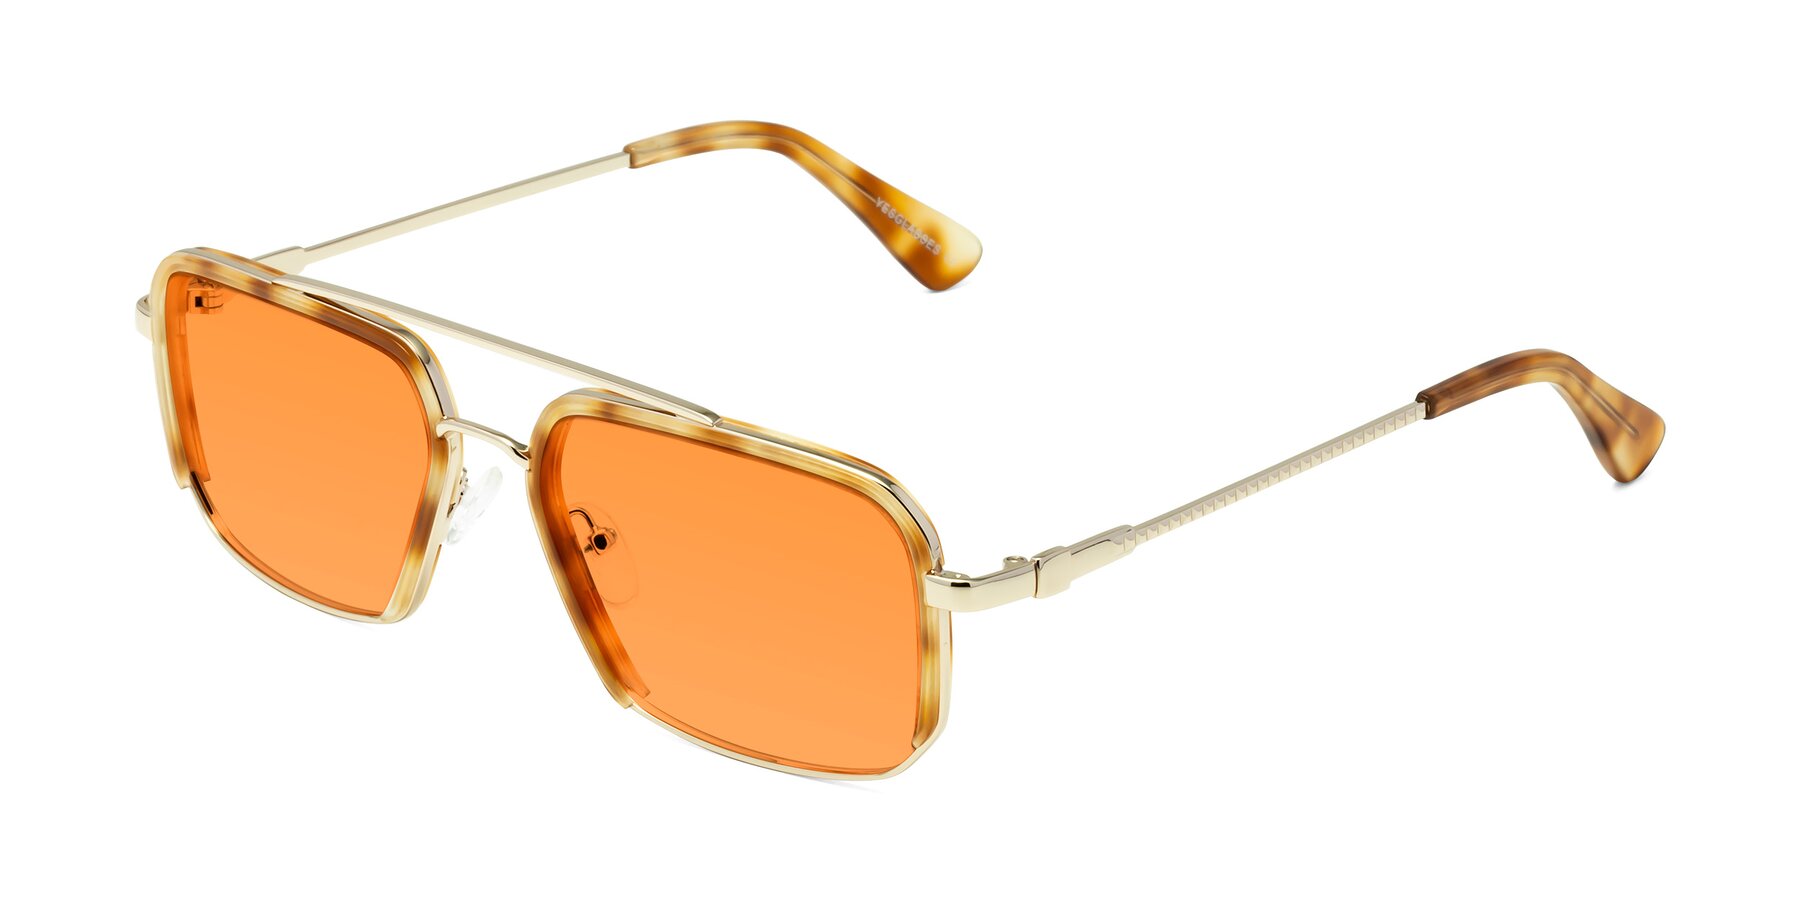 Angle of Dechter in Yellow Tortoise-Gold with Orange Tinted Lenses